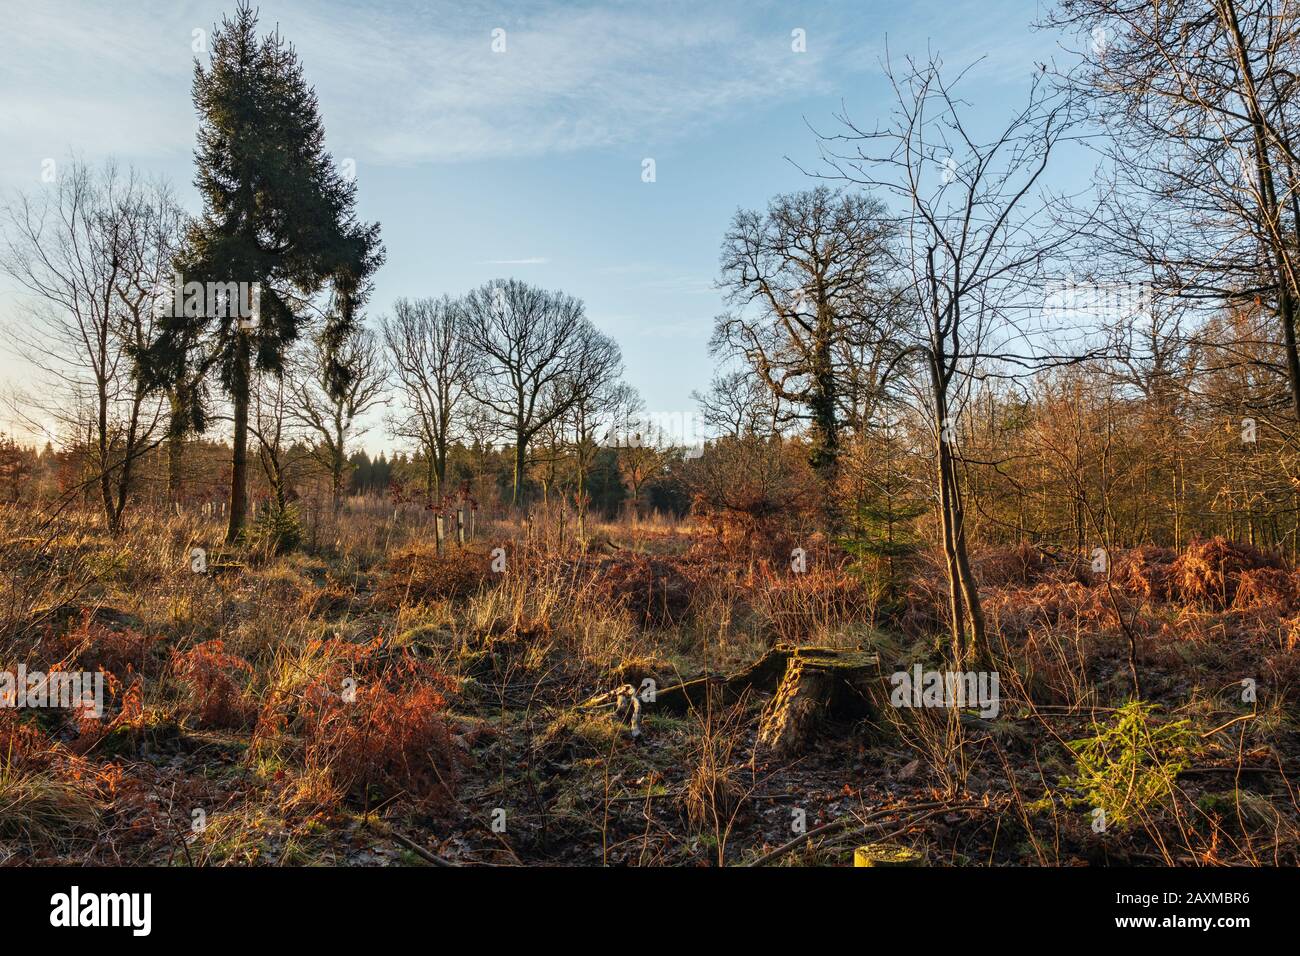 The Forest of Dean near Cinderford, Gloucestershire. Stock Photo